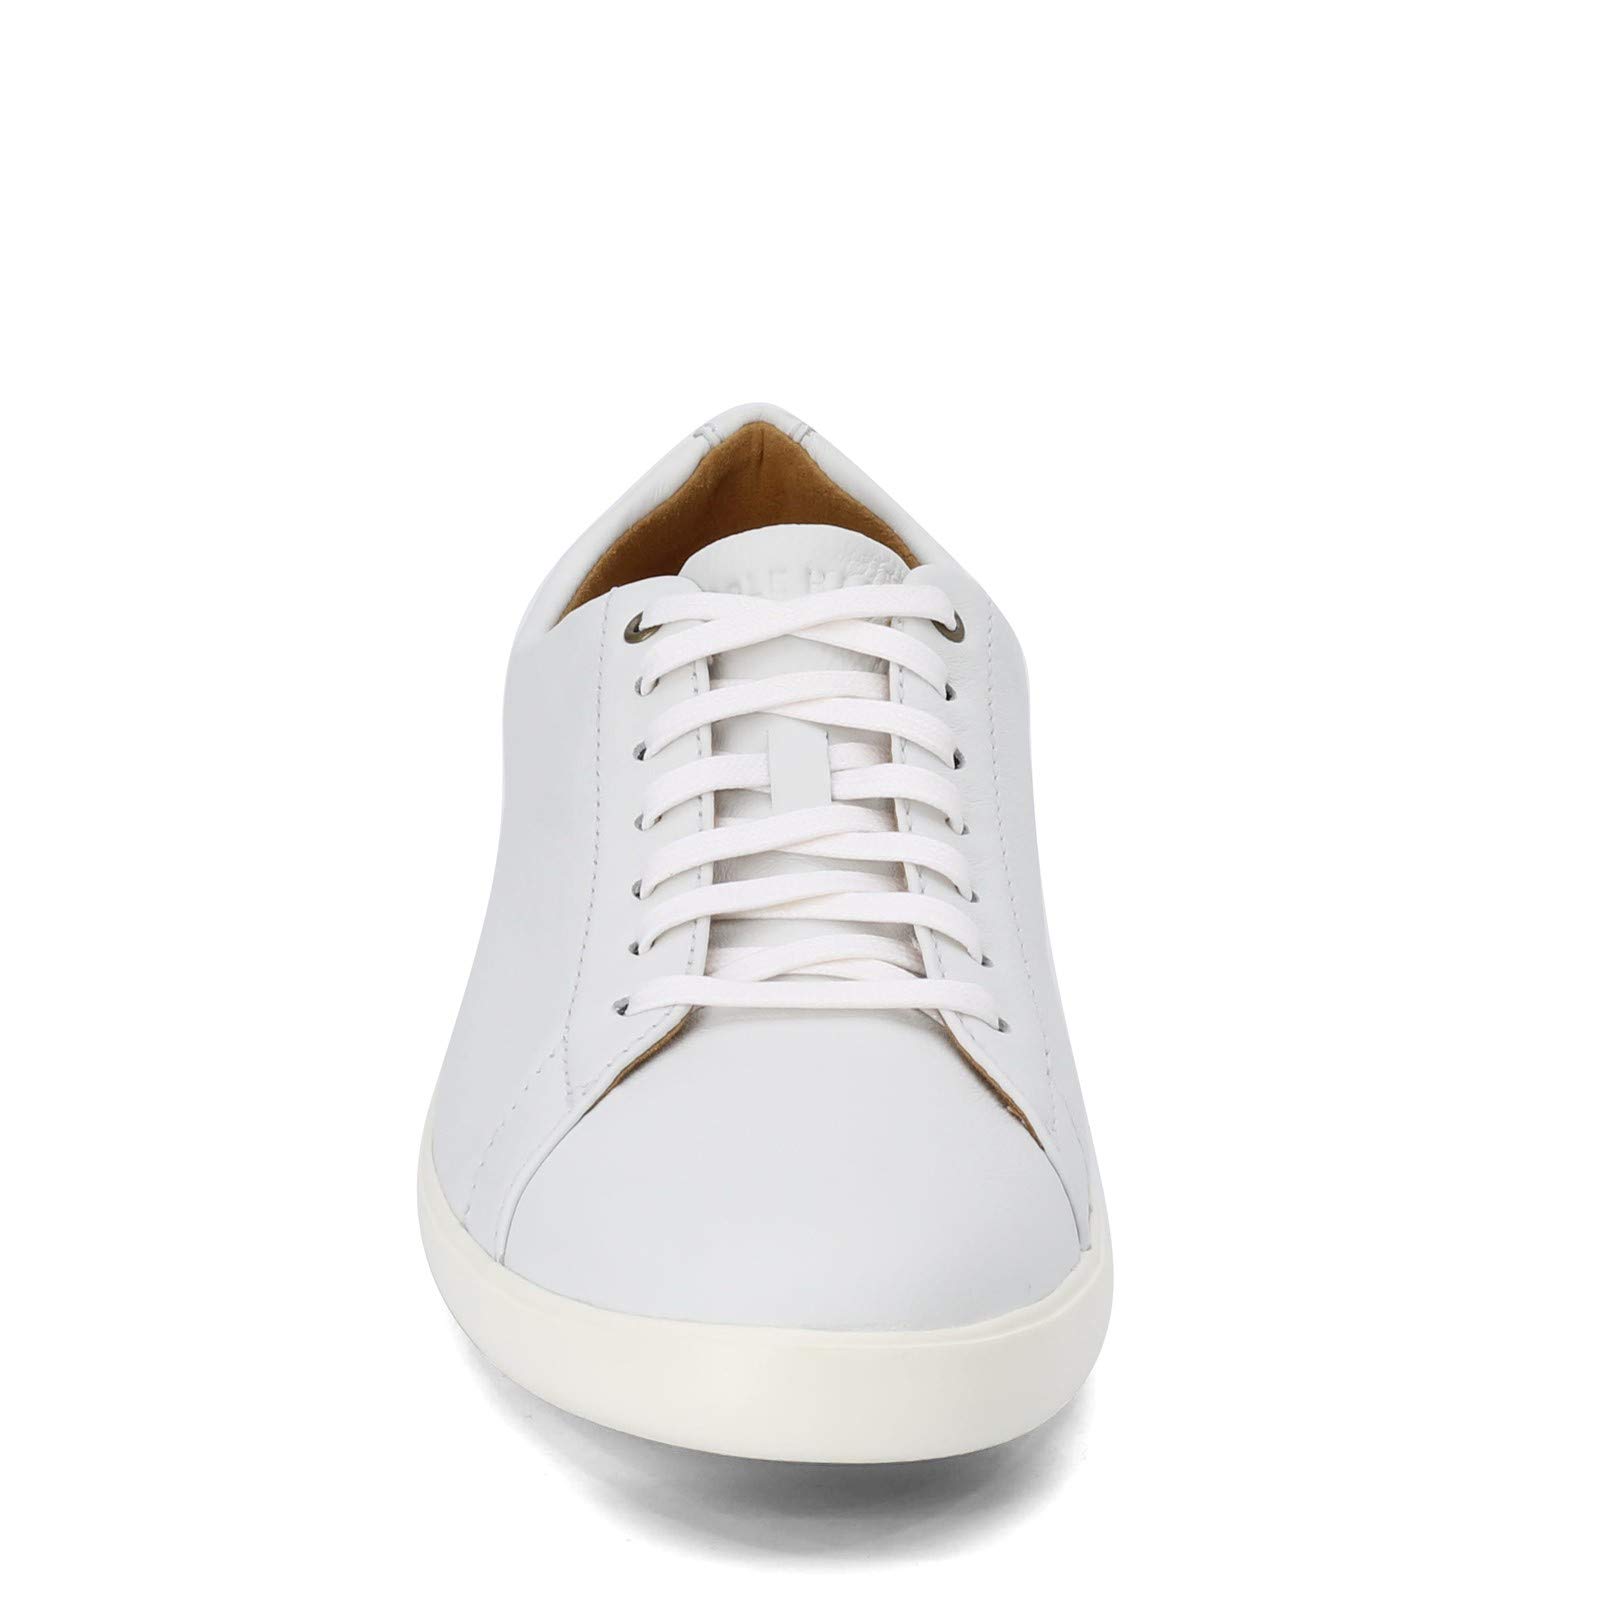 Cole Haan mens Grand Crosscourt Ii Sneaker, White Leather, 8 US